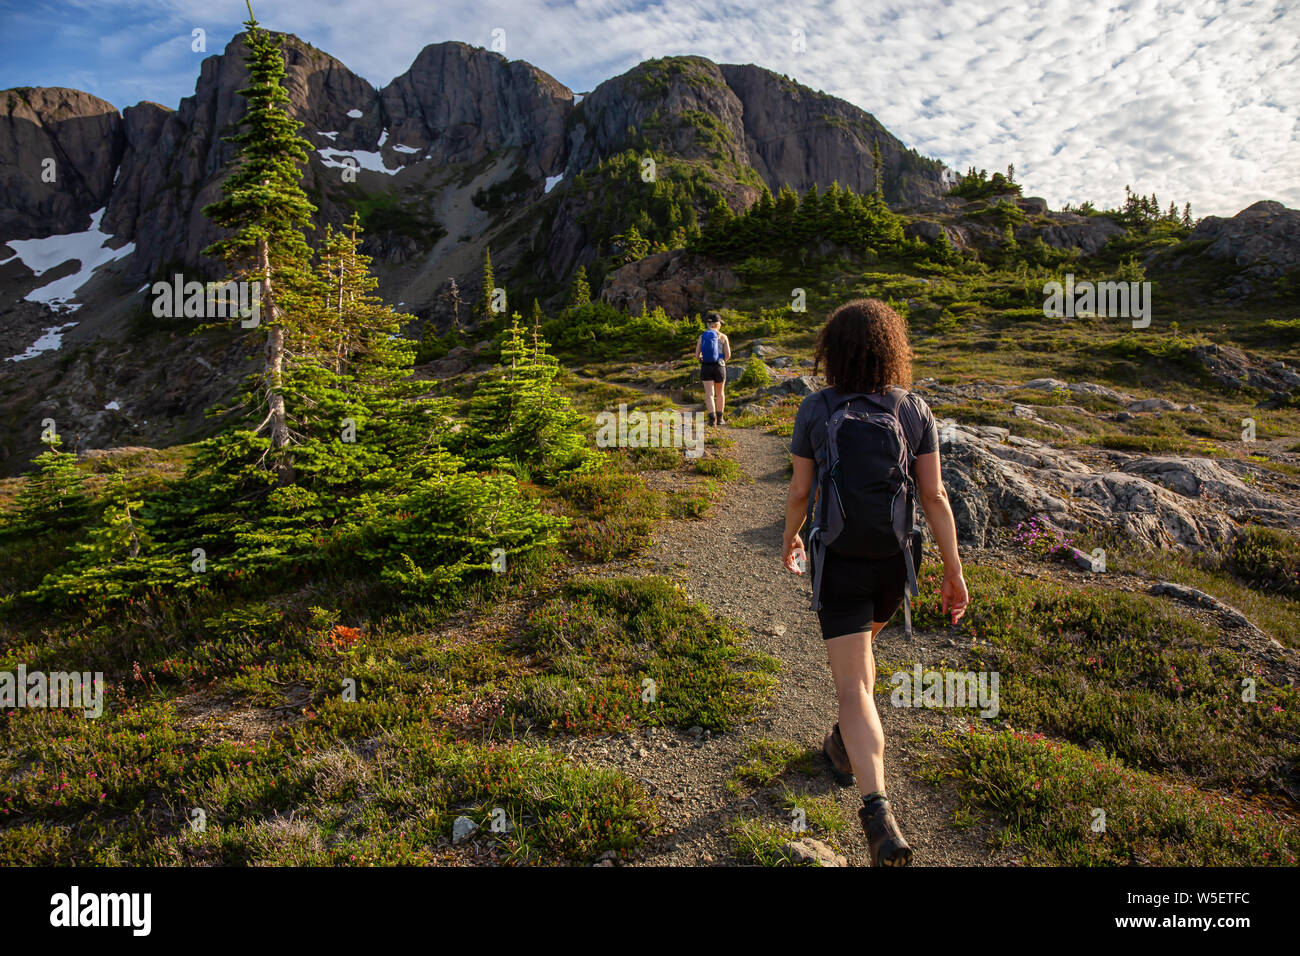 Adventurous girl hiking the beautiful trail in the Canadian Mountain Landscape during a vibrant summer evening. Taken at Mt Arrowsmith, near Nanaimo, Stock Photo